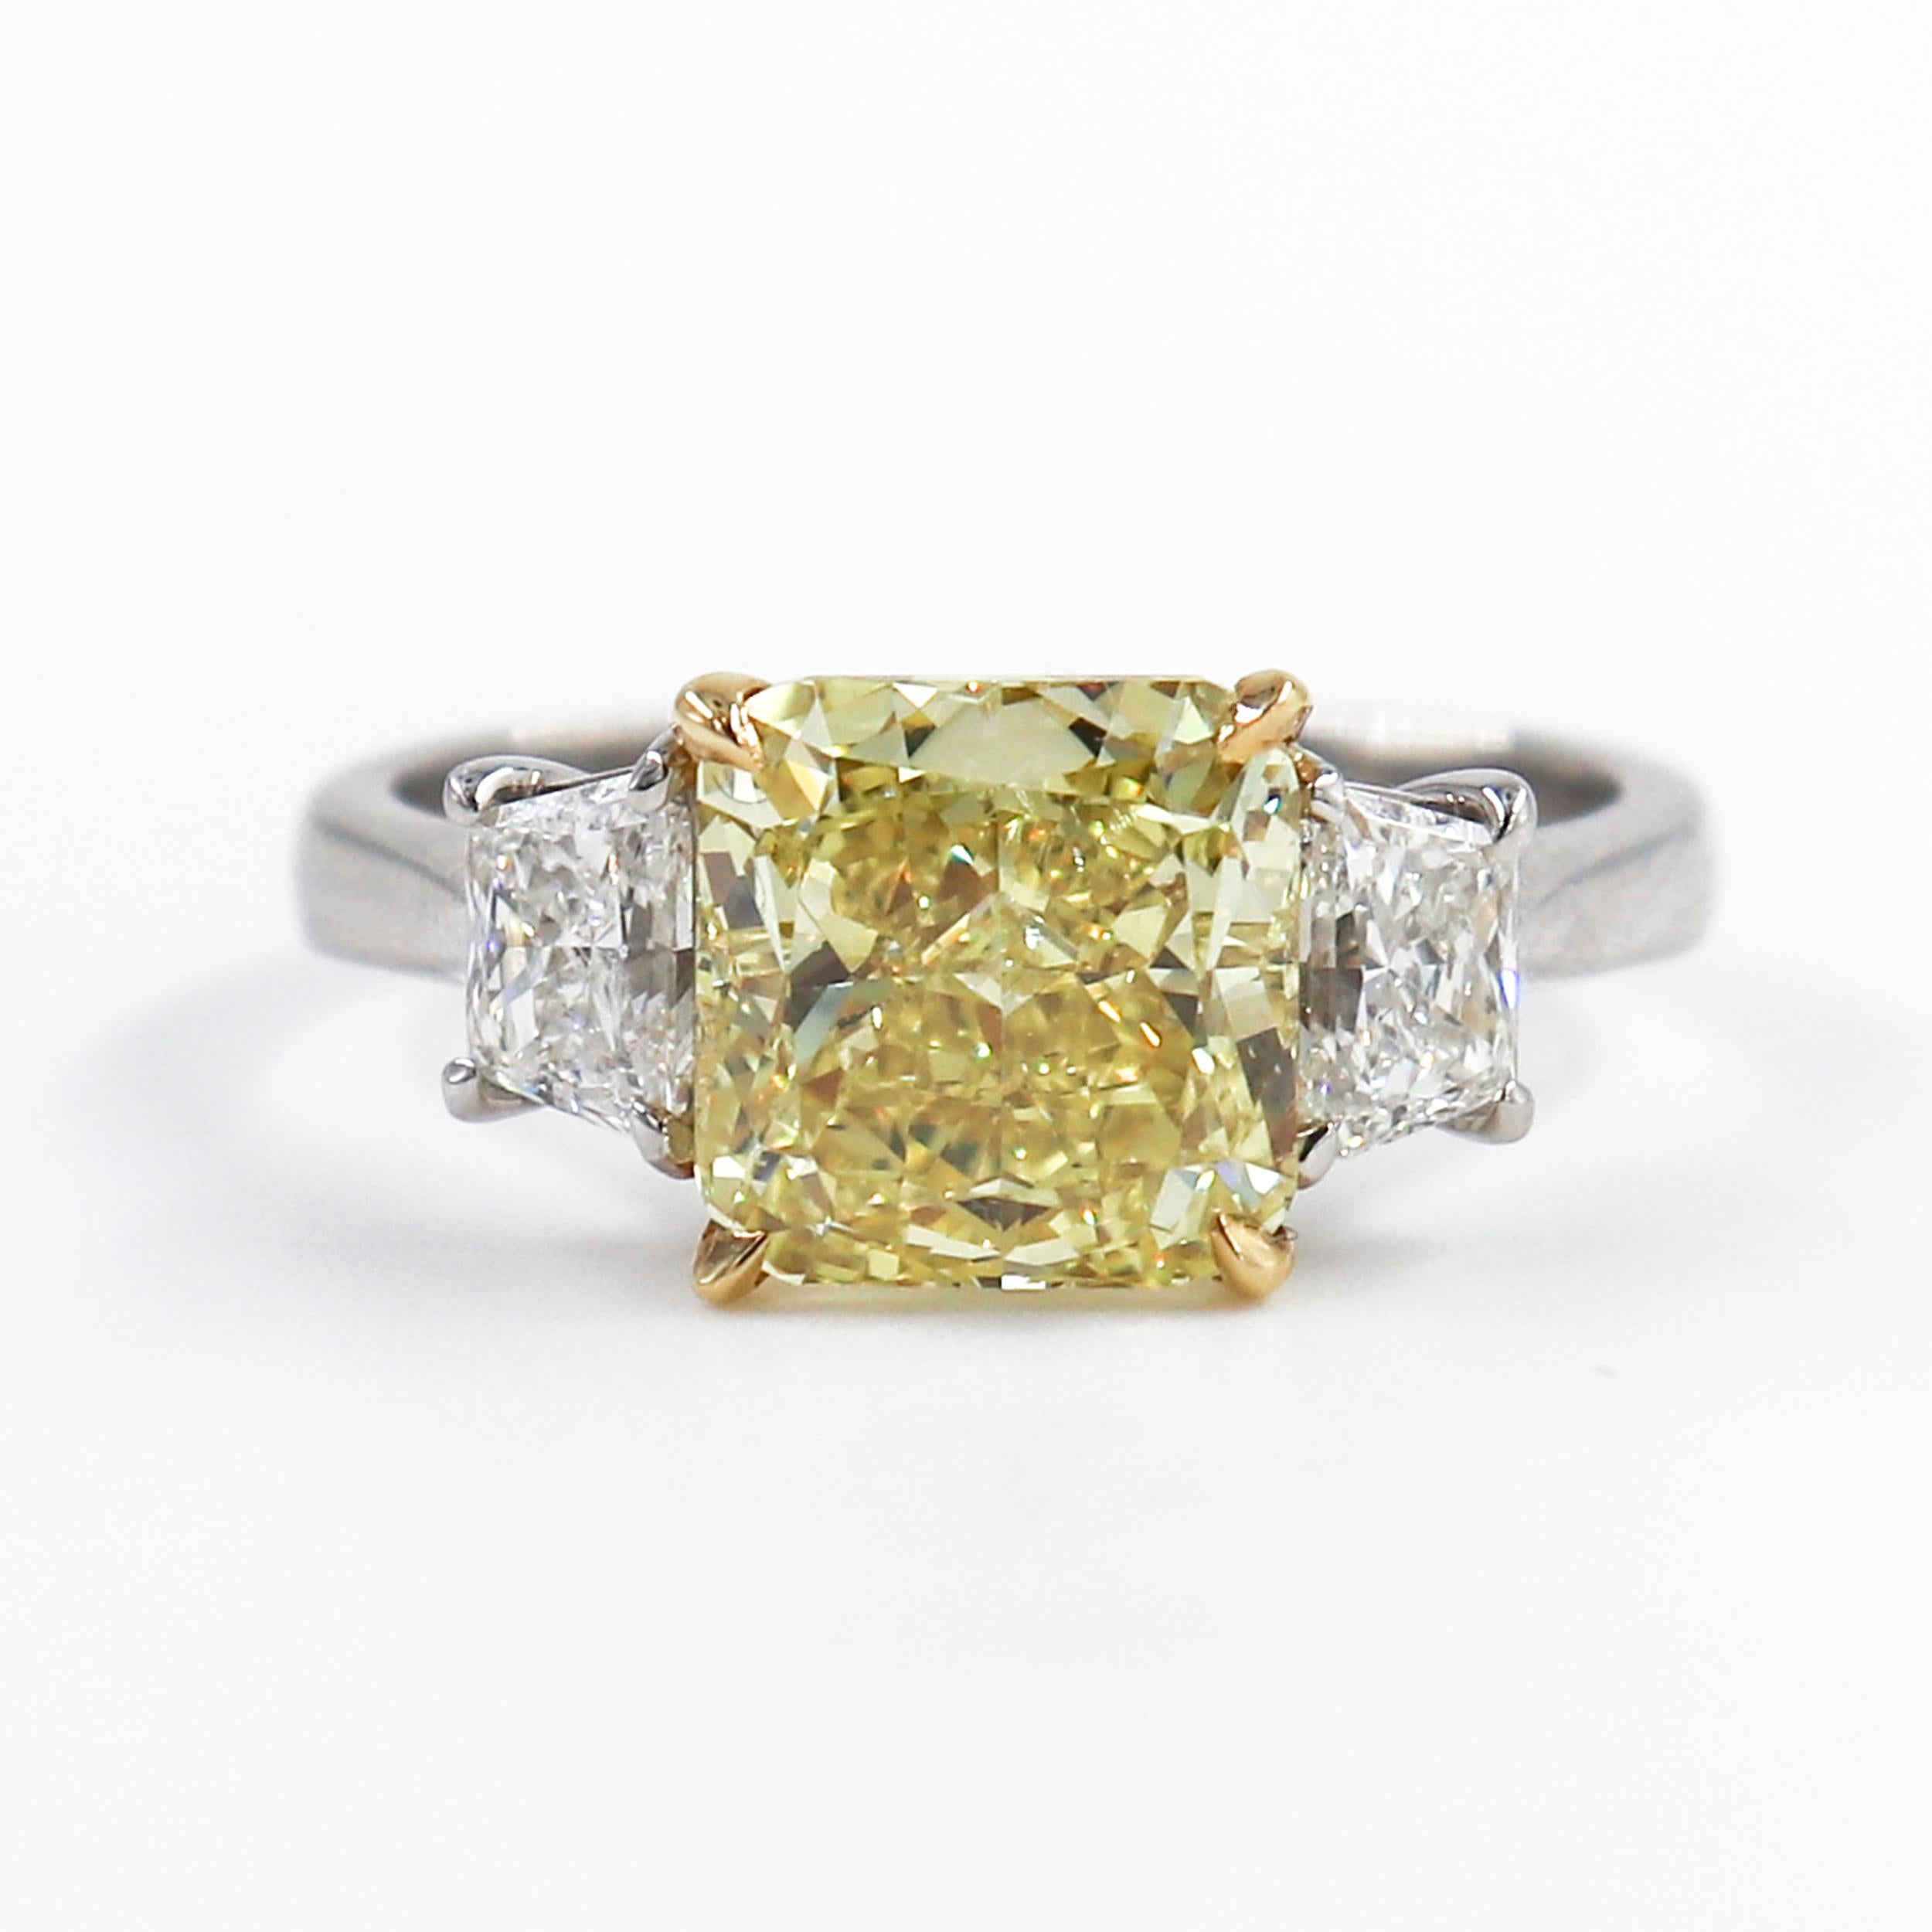 This stunning ring by J. Birnbach features an exceptionally colorful 2.86 carat radiant cut yellow diamond. The diamond's color has been graded Fancy Vivid by GIA, and it is rare to find a diamond with such a beautifully rich and saturated color.